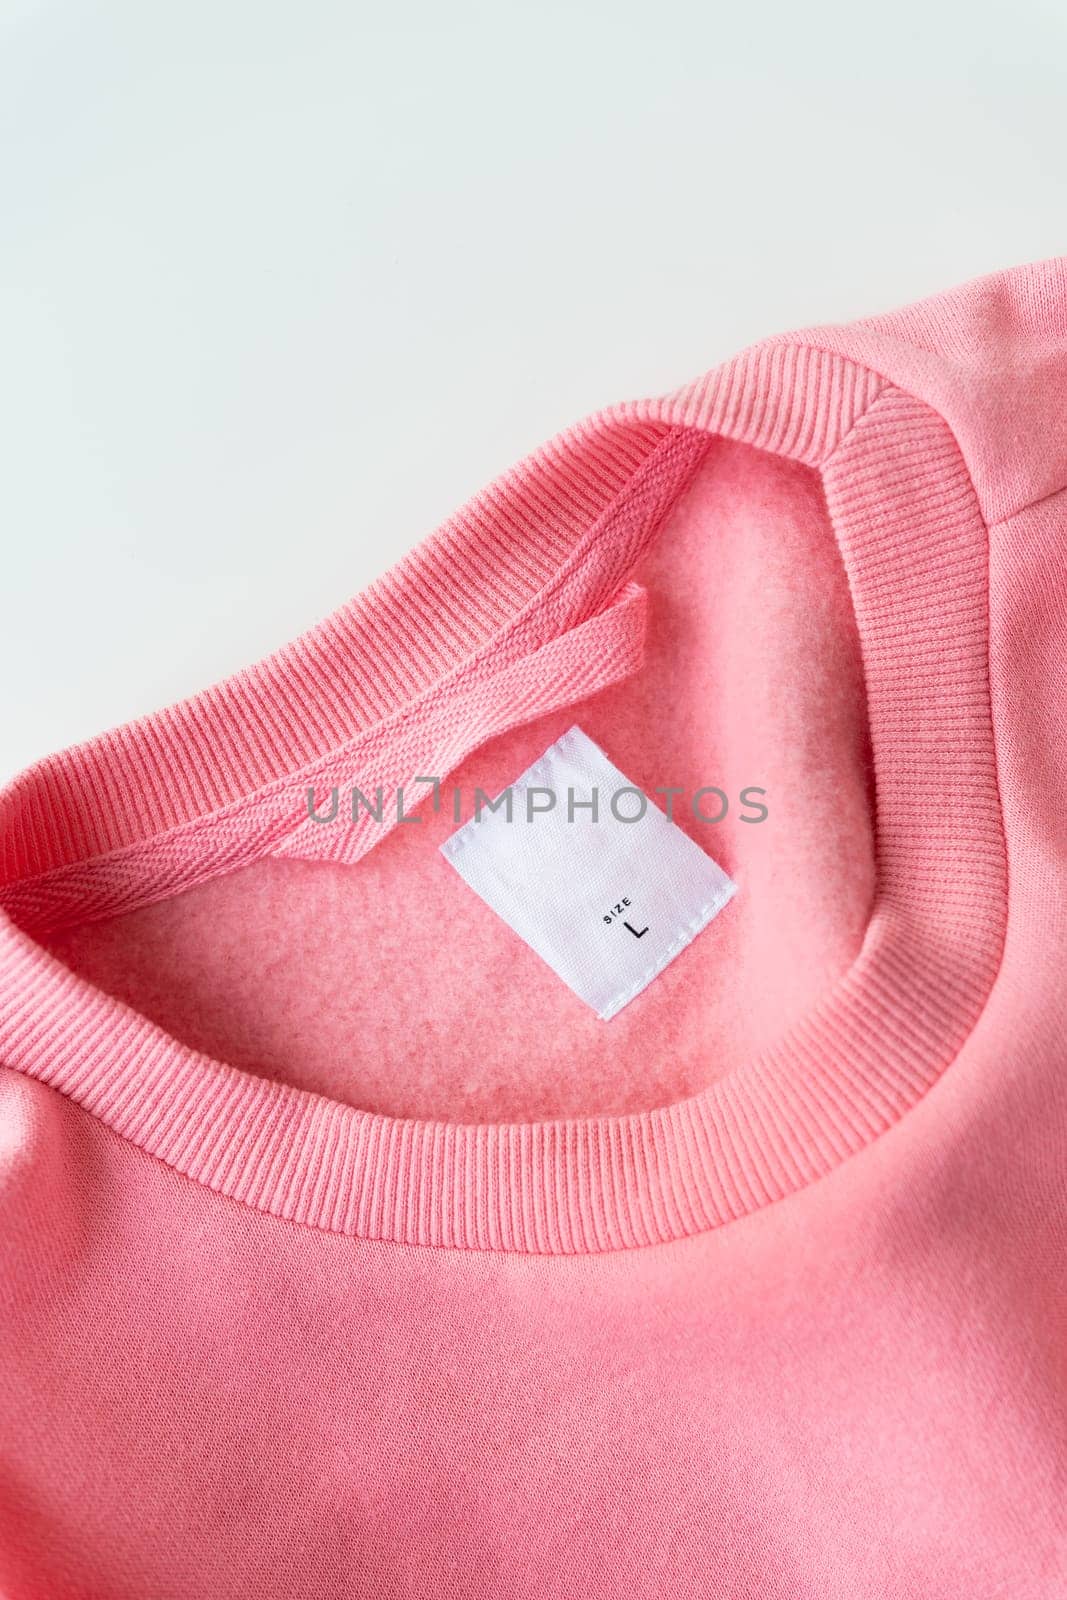 Clothing, fashion, shopping concept - closeup of a coral sweater tag. Place for inscription. Size L is written on the jacket